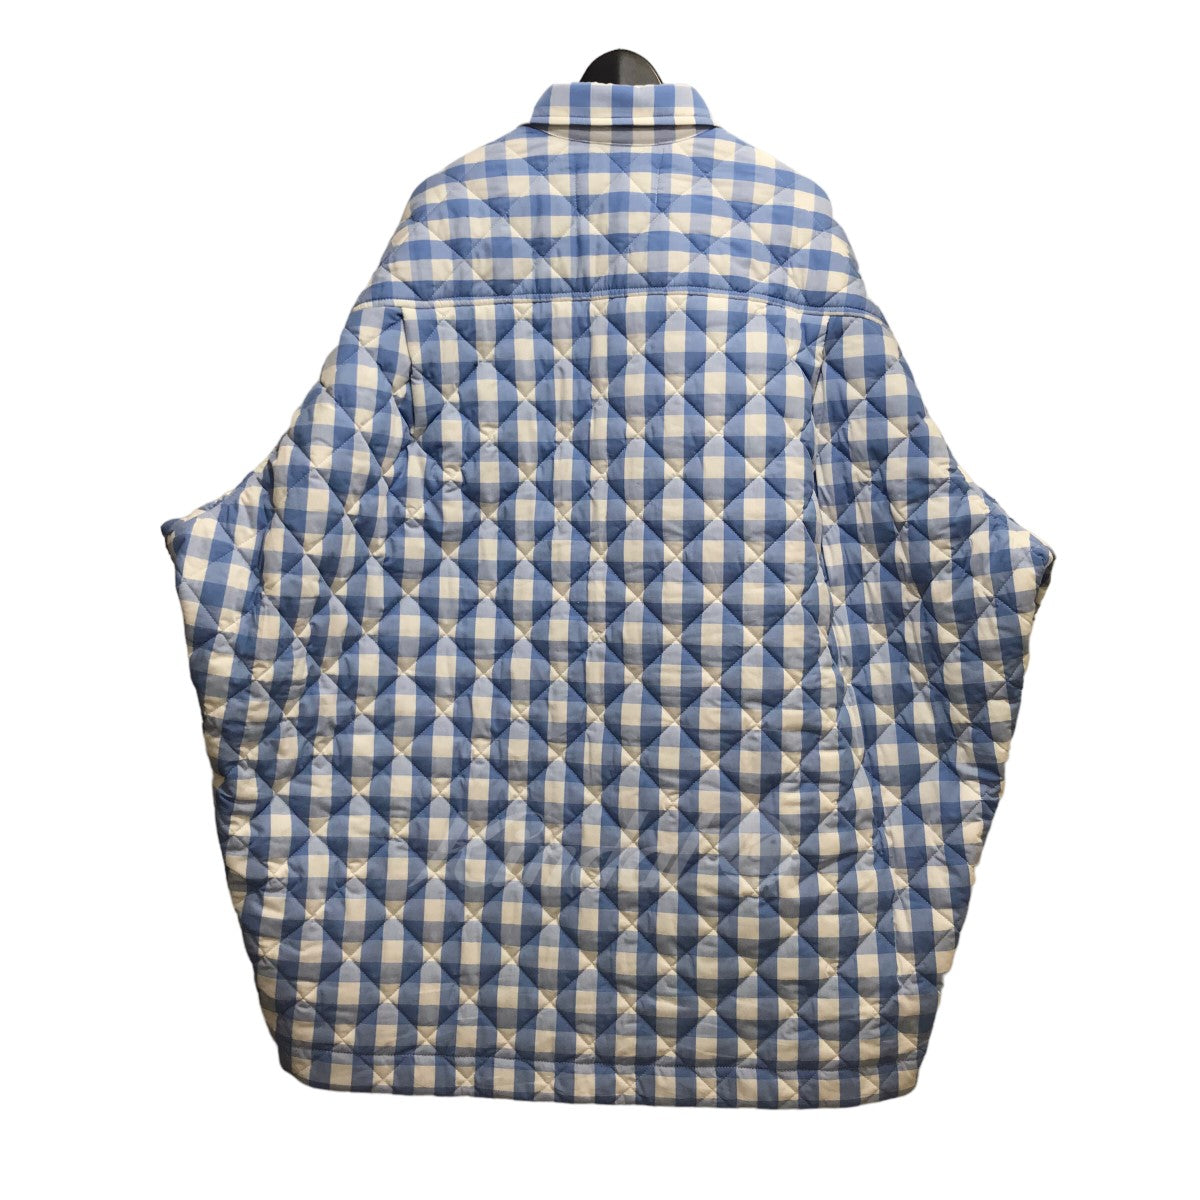 TSTS(ティーエスティーエス) 23AW「QUILTED GINGHAM SHIRT BLOUSON ...